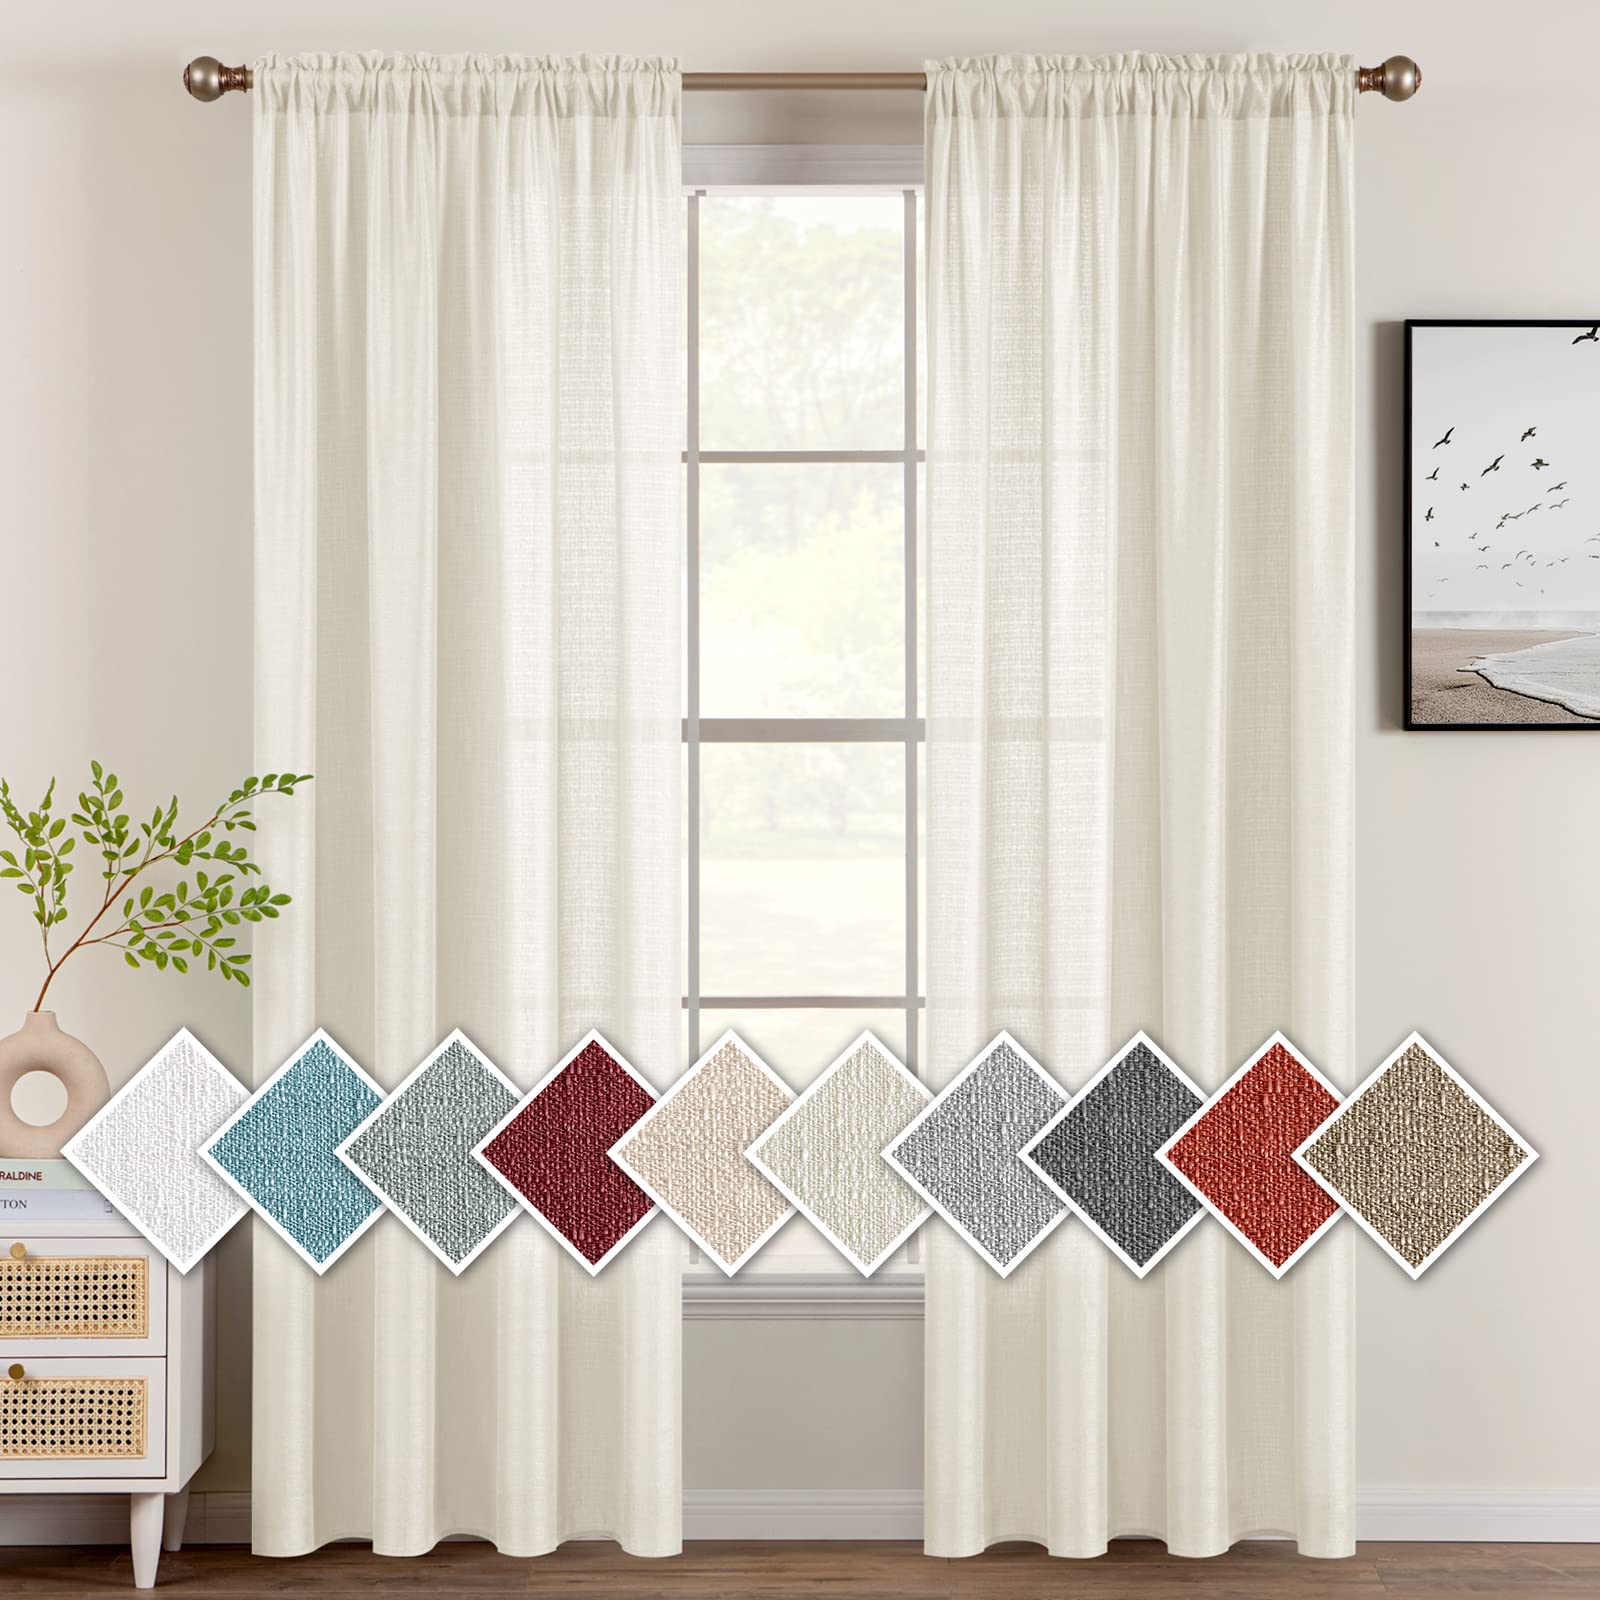  MIULEE 2 Panels Solid Color Sheer Curtains 108 Inch